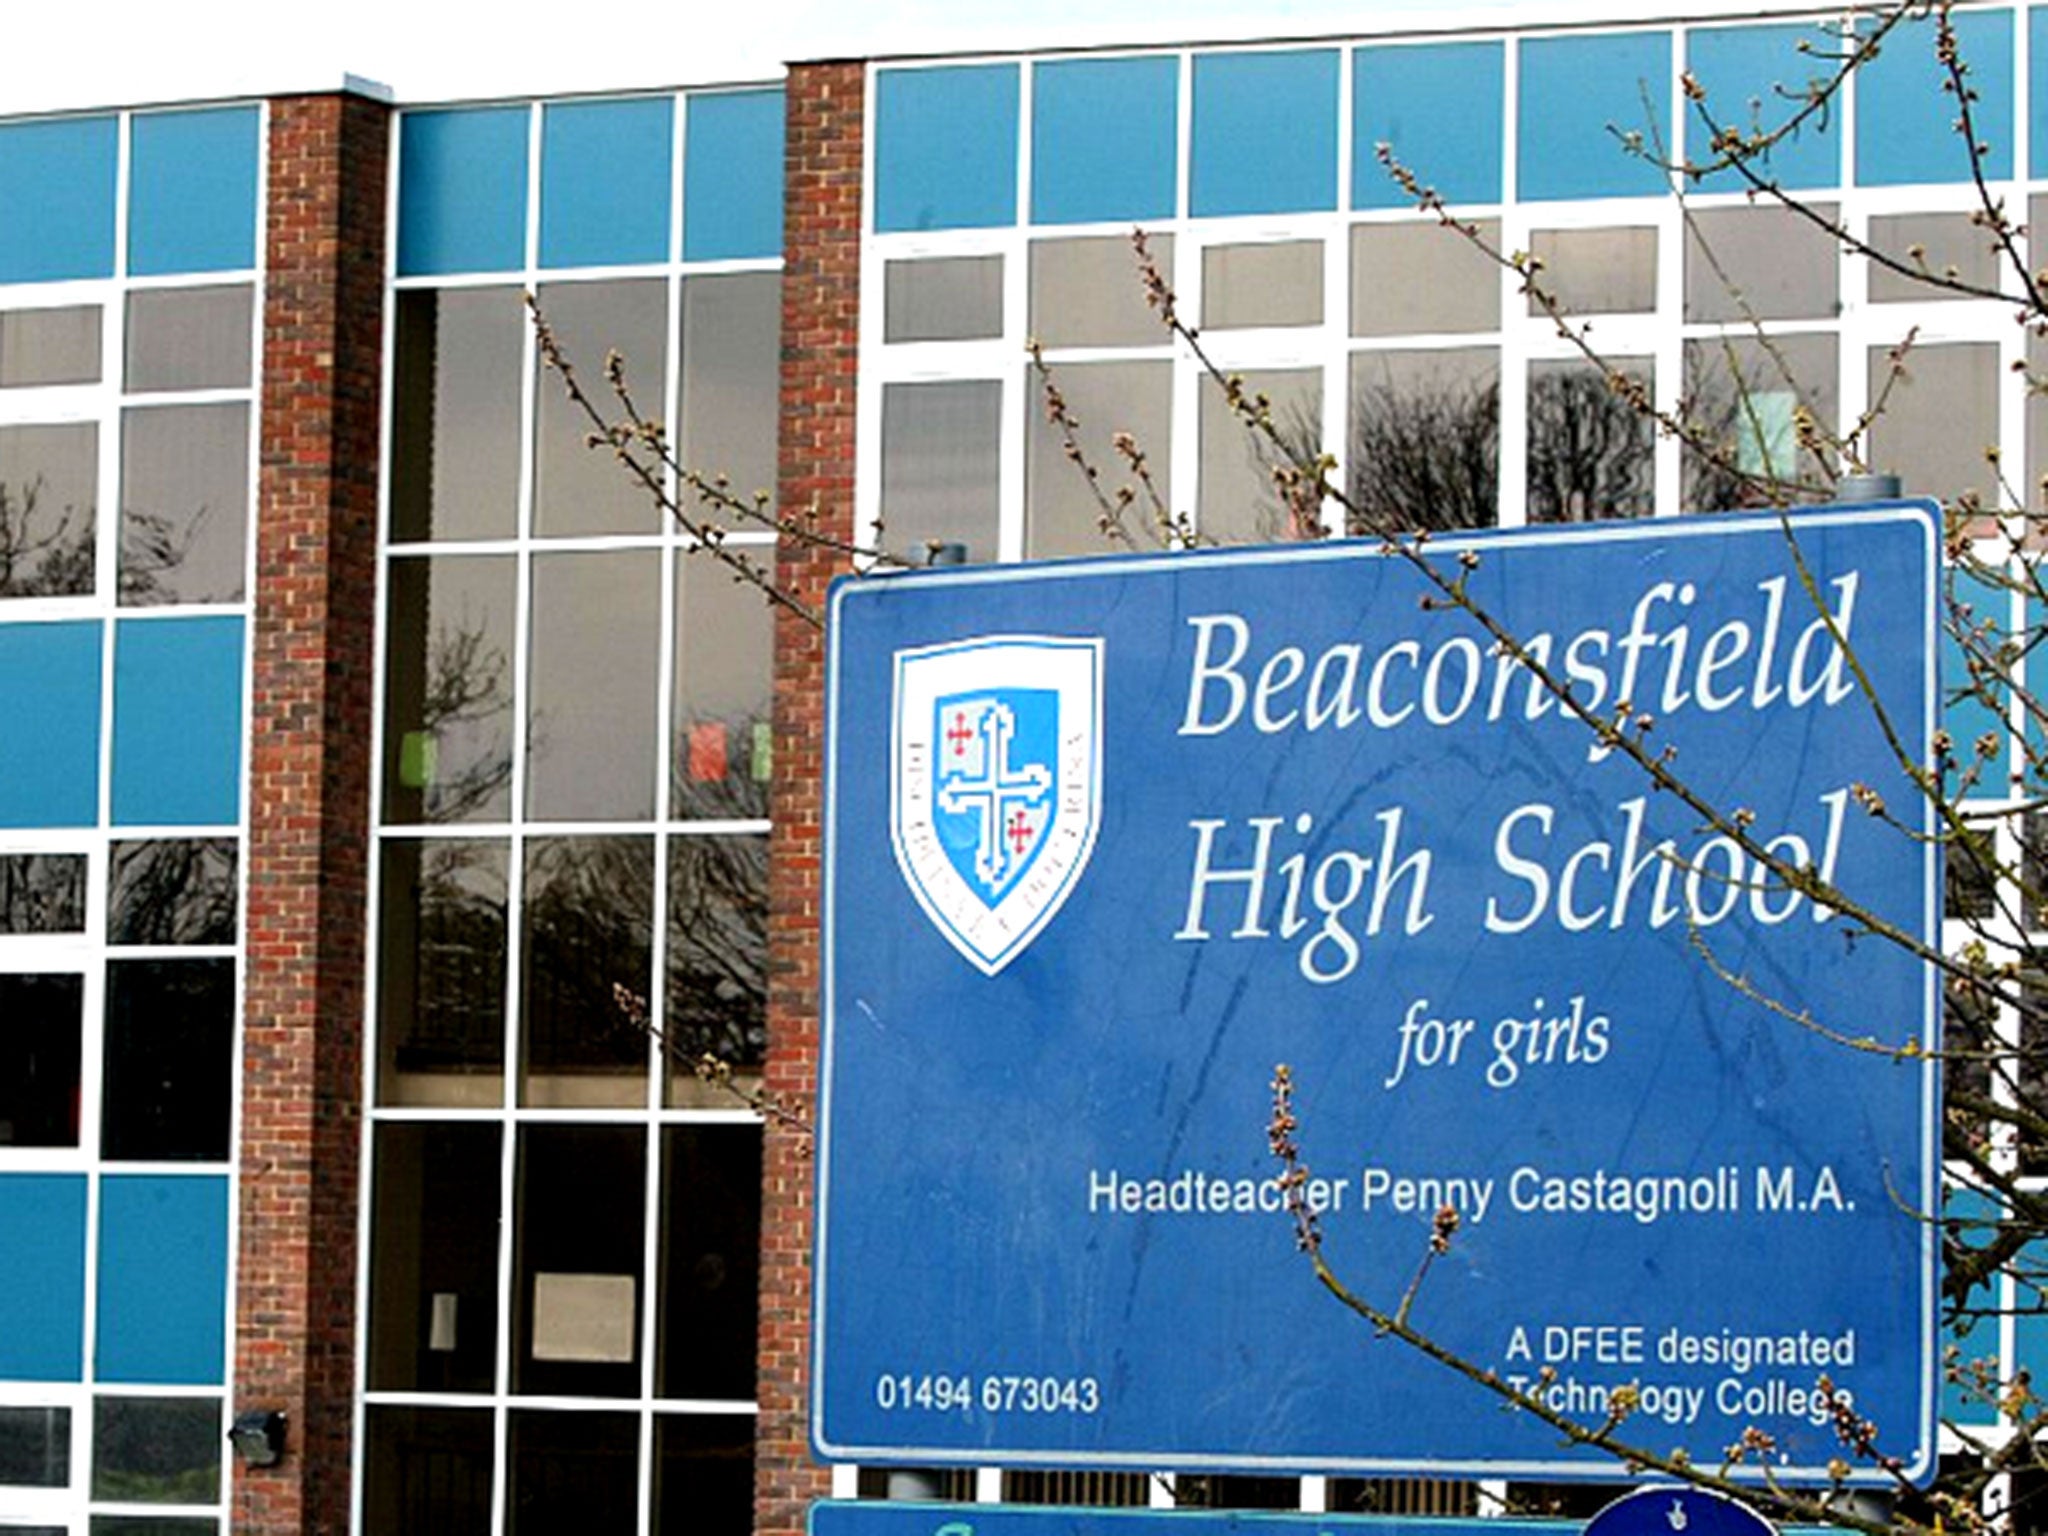 At Beaconsfield High School, parents will have to fork out an extra £483,031 on average for a house in its catchment area